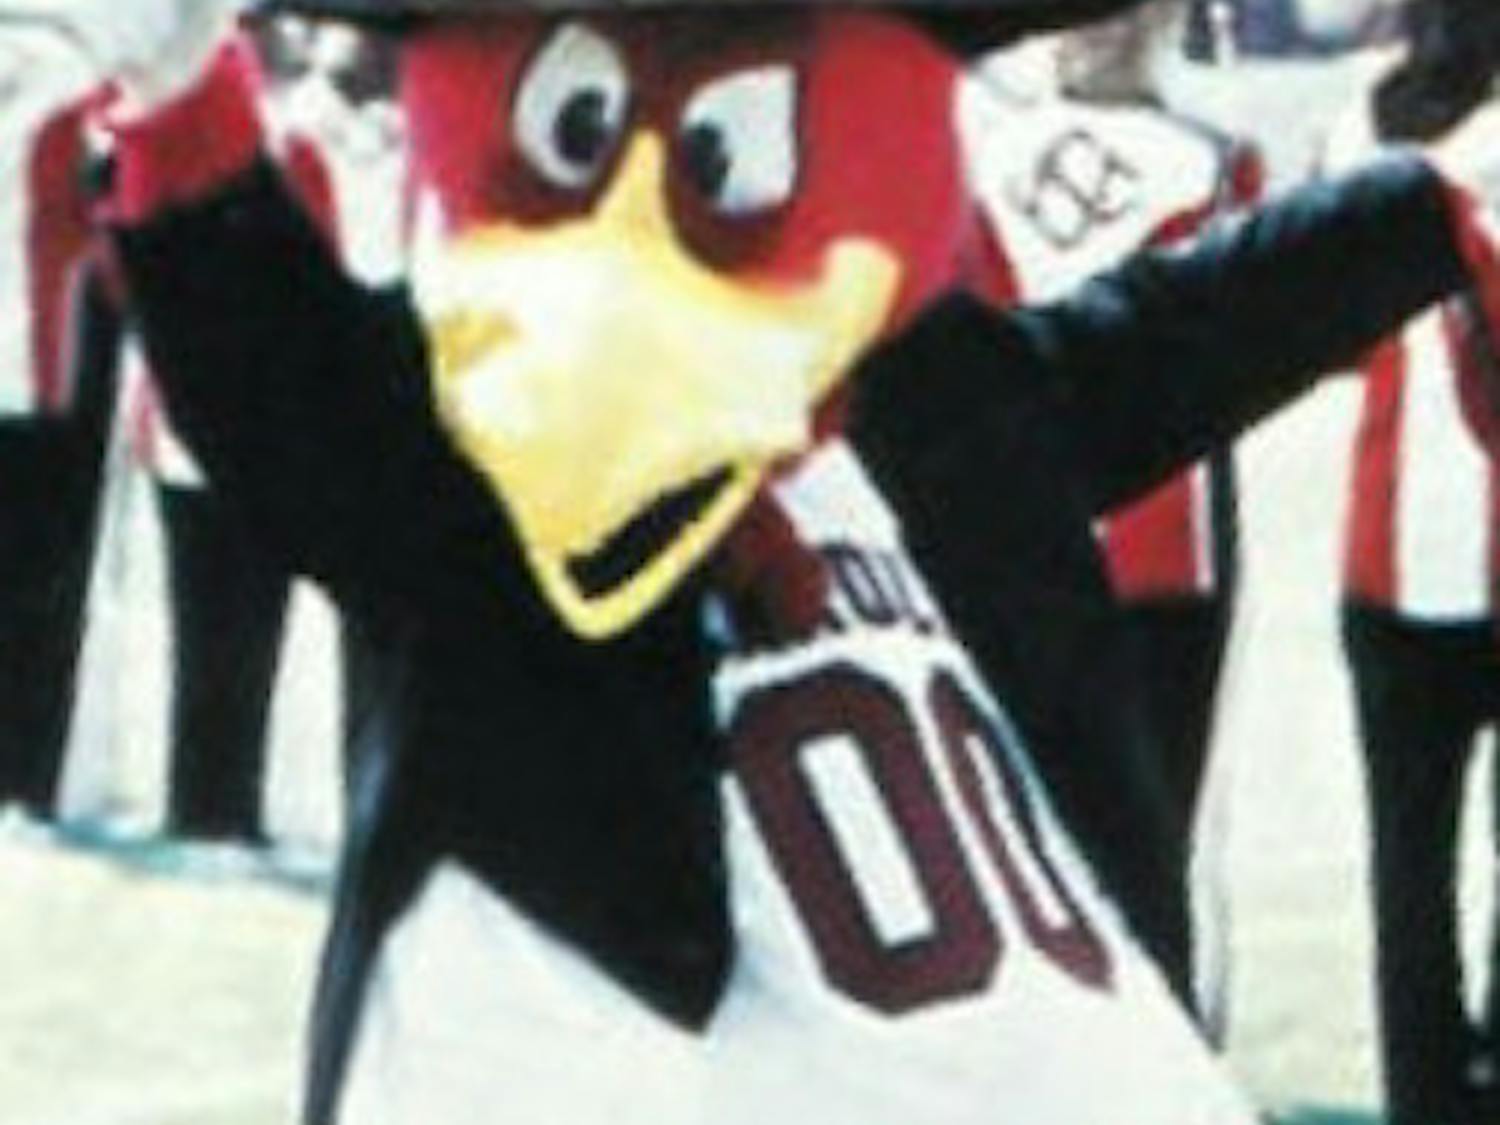 Cocky wears a top hat and suit as he cheers in front of the marching band on the football field. This moment was captured in 1985 and shows off one of many specialty outfits for Cocky.